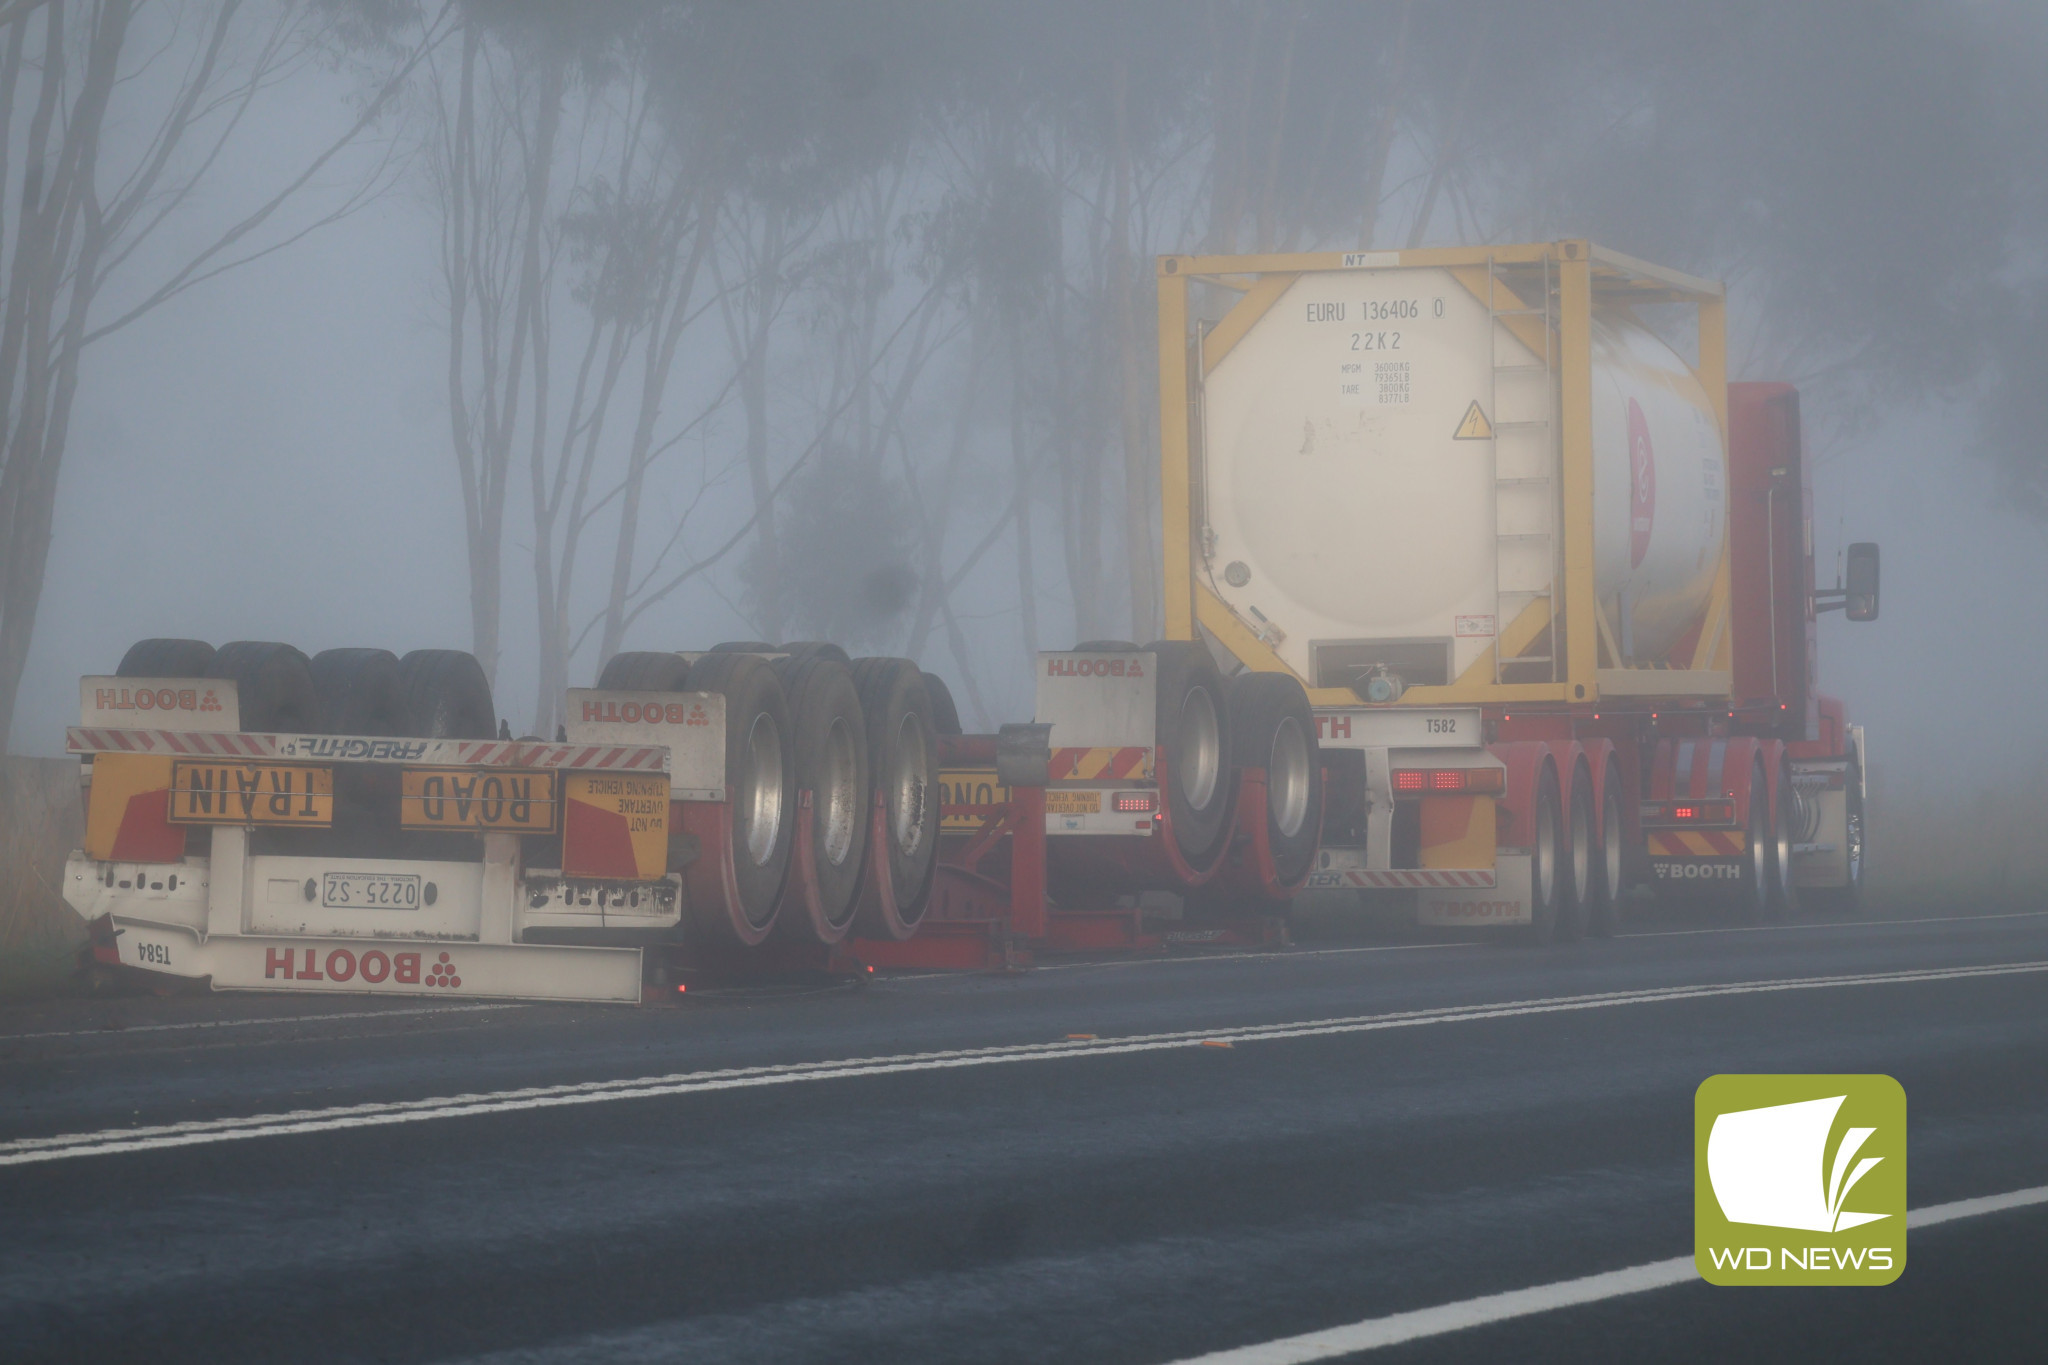 Stay safe: A truck rollover on the Princes Highway has prompted a warning to drivers to be cautious when driving in difficult conditions.